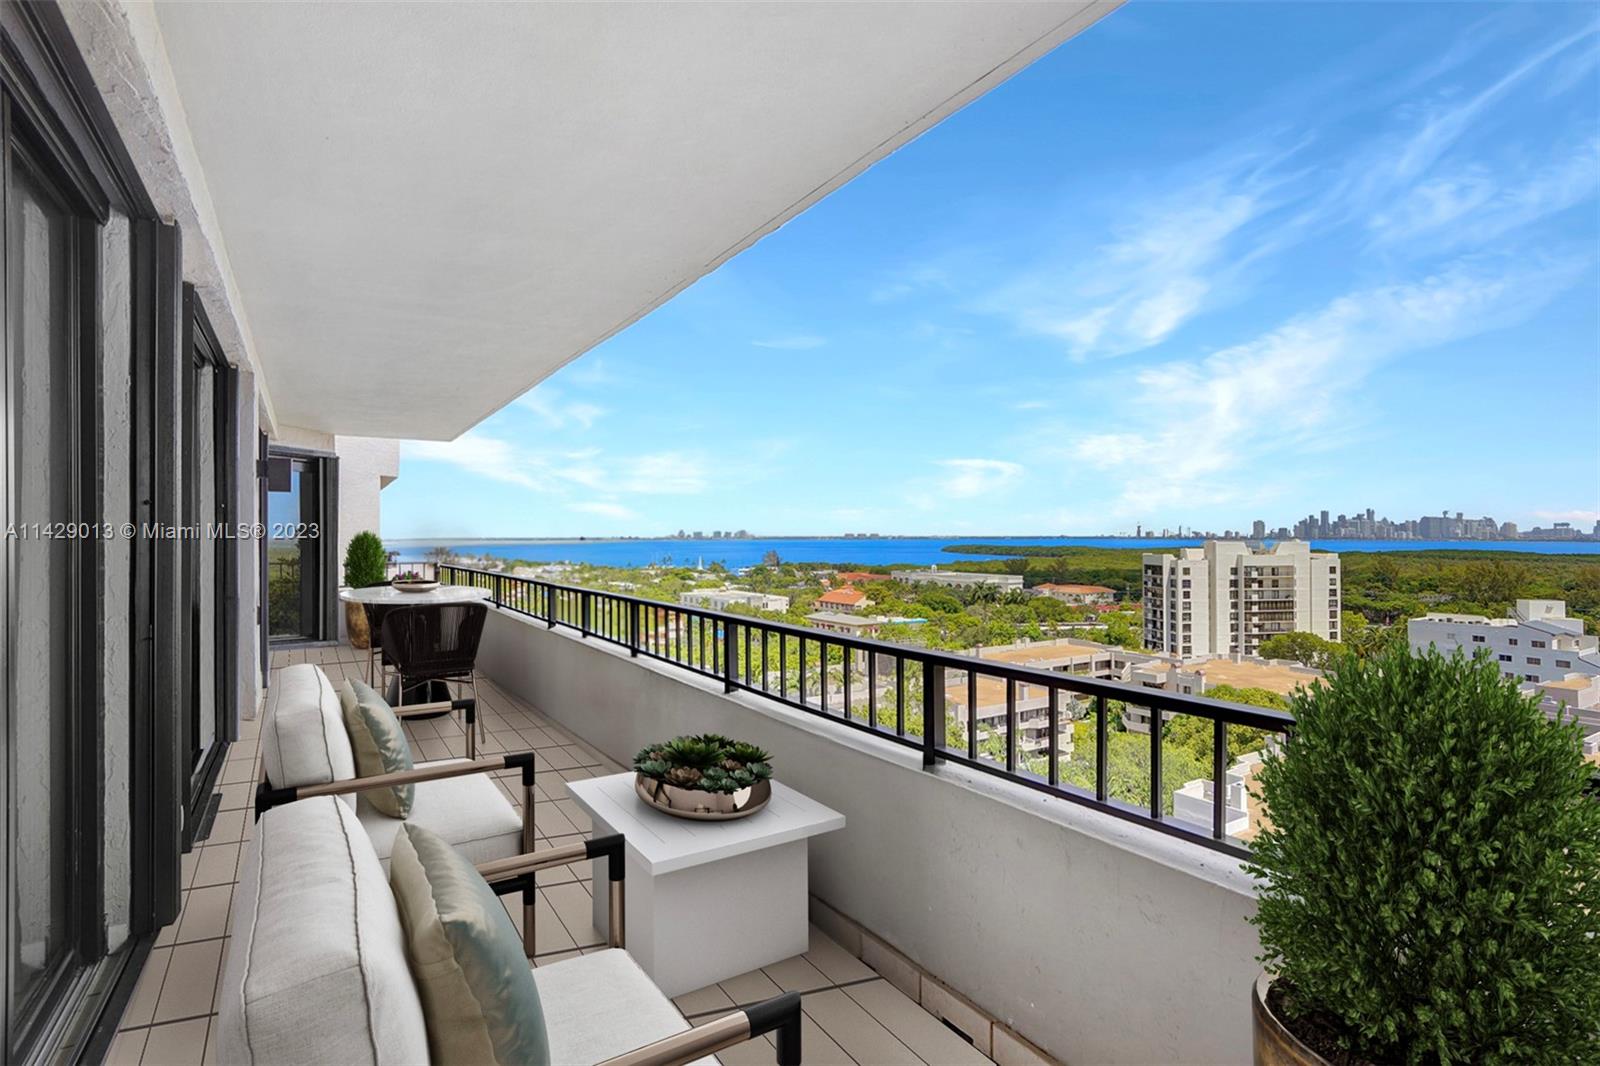 Welcome to a one-of-a-kind, rarely available Penthouse #1222 at prestigious Key Colony in Key Biscayne! Enjoy spectacular sunsets from your oversized terrace w extraordinary, unobstructed, 180 degree infinite views oF the iconic Miami skyline. Perfect for a large family w a flexible floor plan of over 3,120 sq/ft., this unique 4/3 property feels like a house & is ideal for entertainment. Move right-in or modify & update to make it your own. Two of the rooms can easily be reconverted back to bedrooms. Every room has water views & access to the massive terrace. Plus, 3 prime parking spaces. Emerald Bay is a full-service luxury building that offers a popular Tennis Center w 12  courts. Enjoy Key Biscayne lifestyle from this oceanfront Penthouse in the sky! Some photos virtually staged.